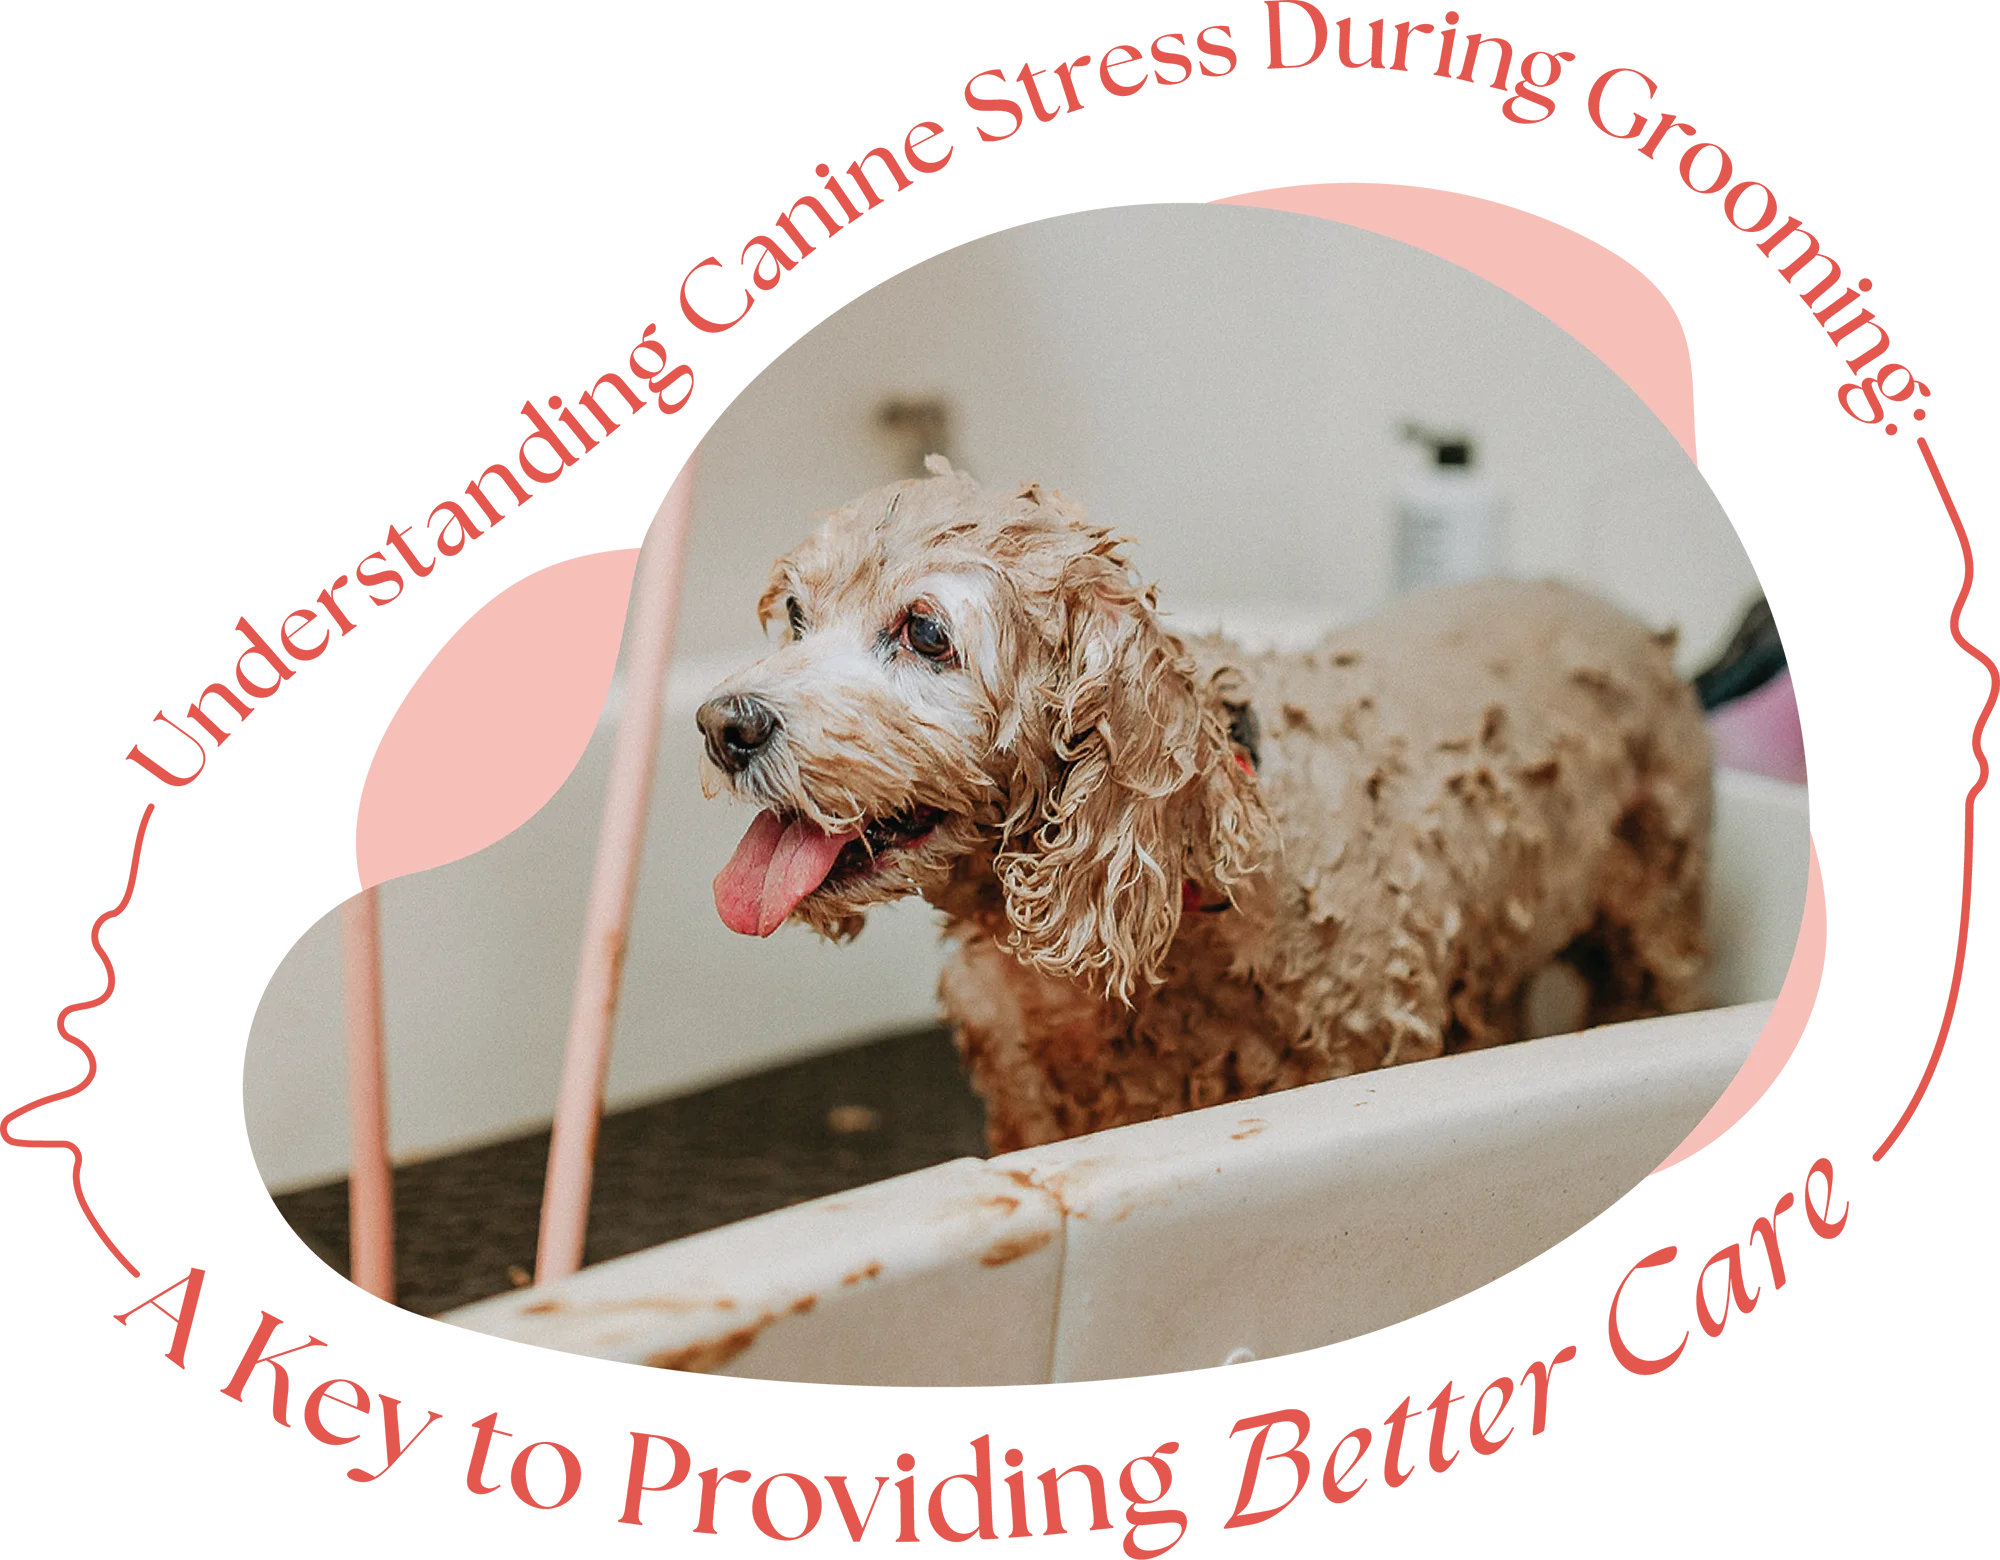 Understanding Canine Stress During Grooming: A Key to Providing Better Care